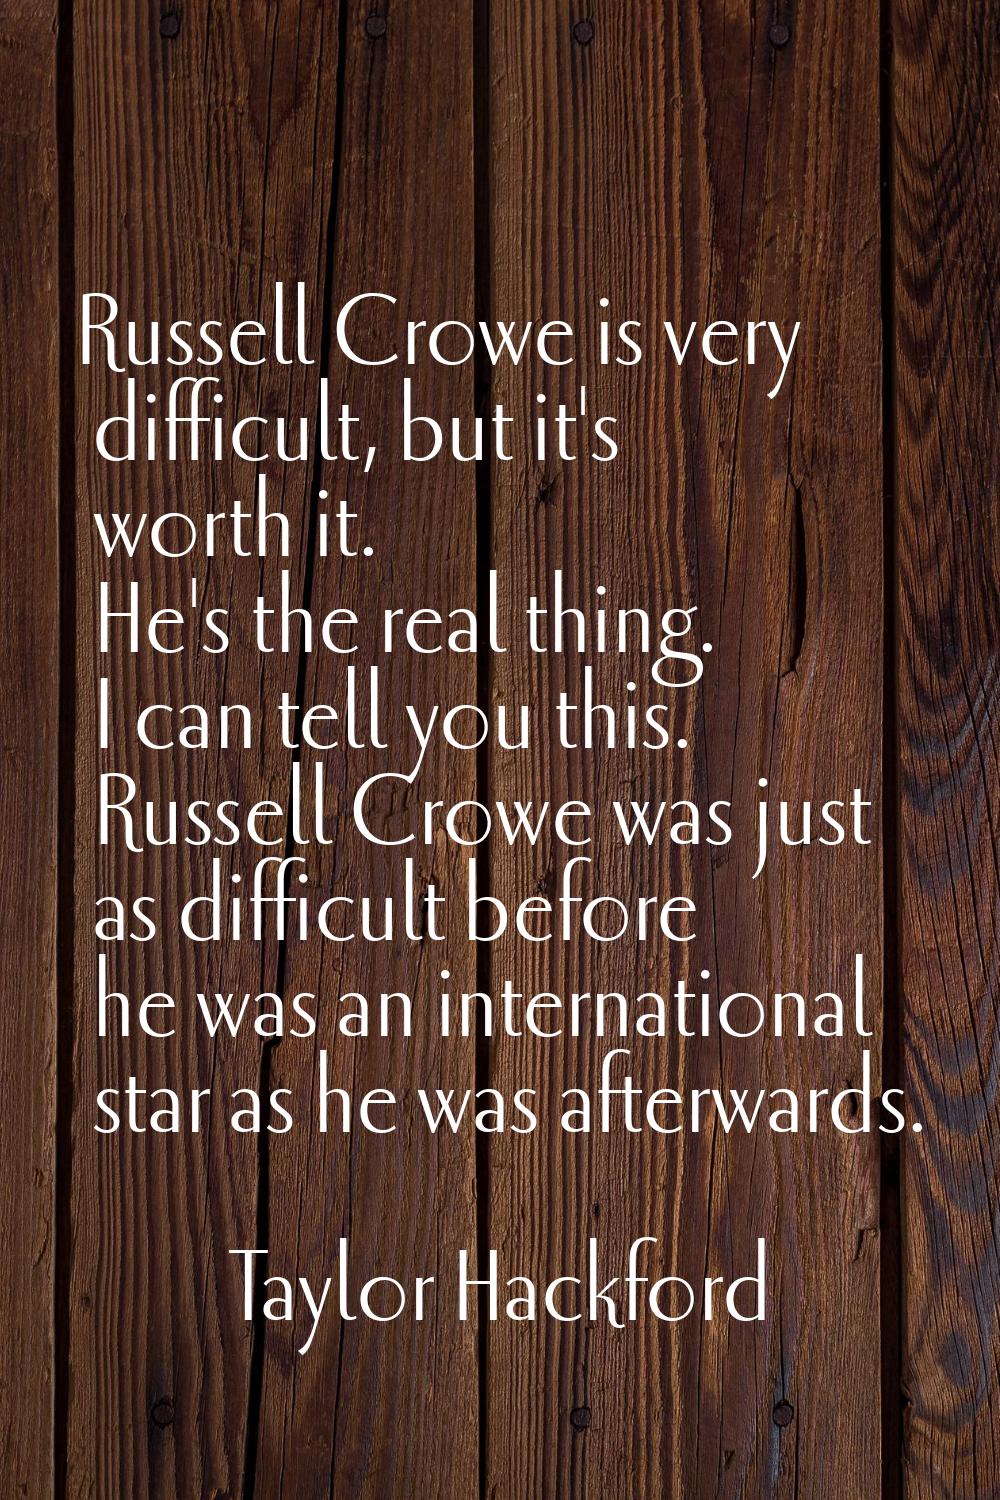 Russell Crowe is very difficult, but it's worth it. He's the real thing. I can tell you this. Russe